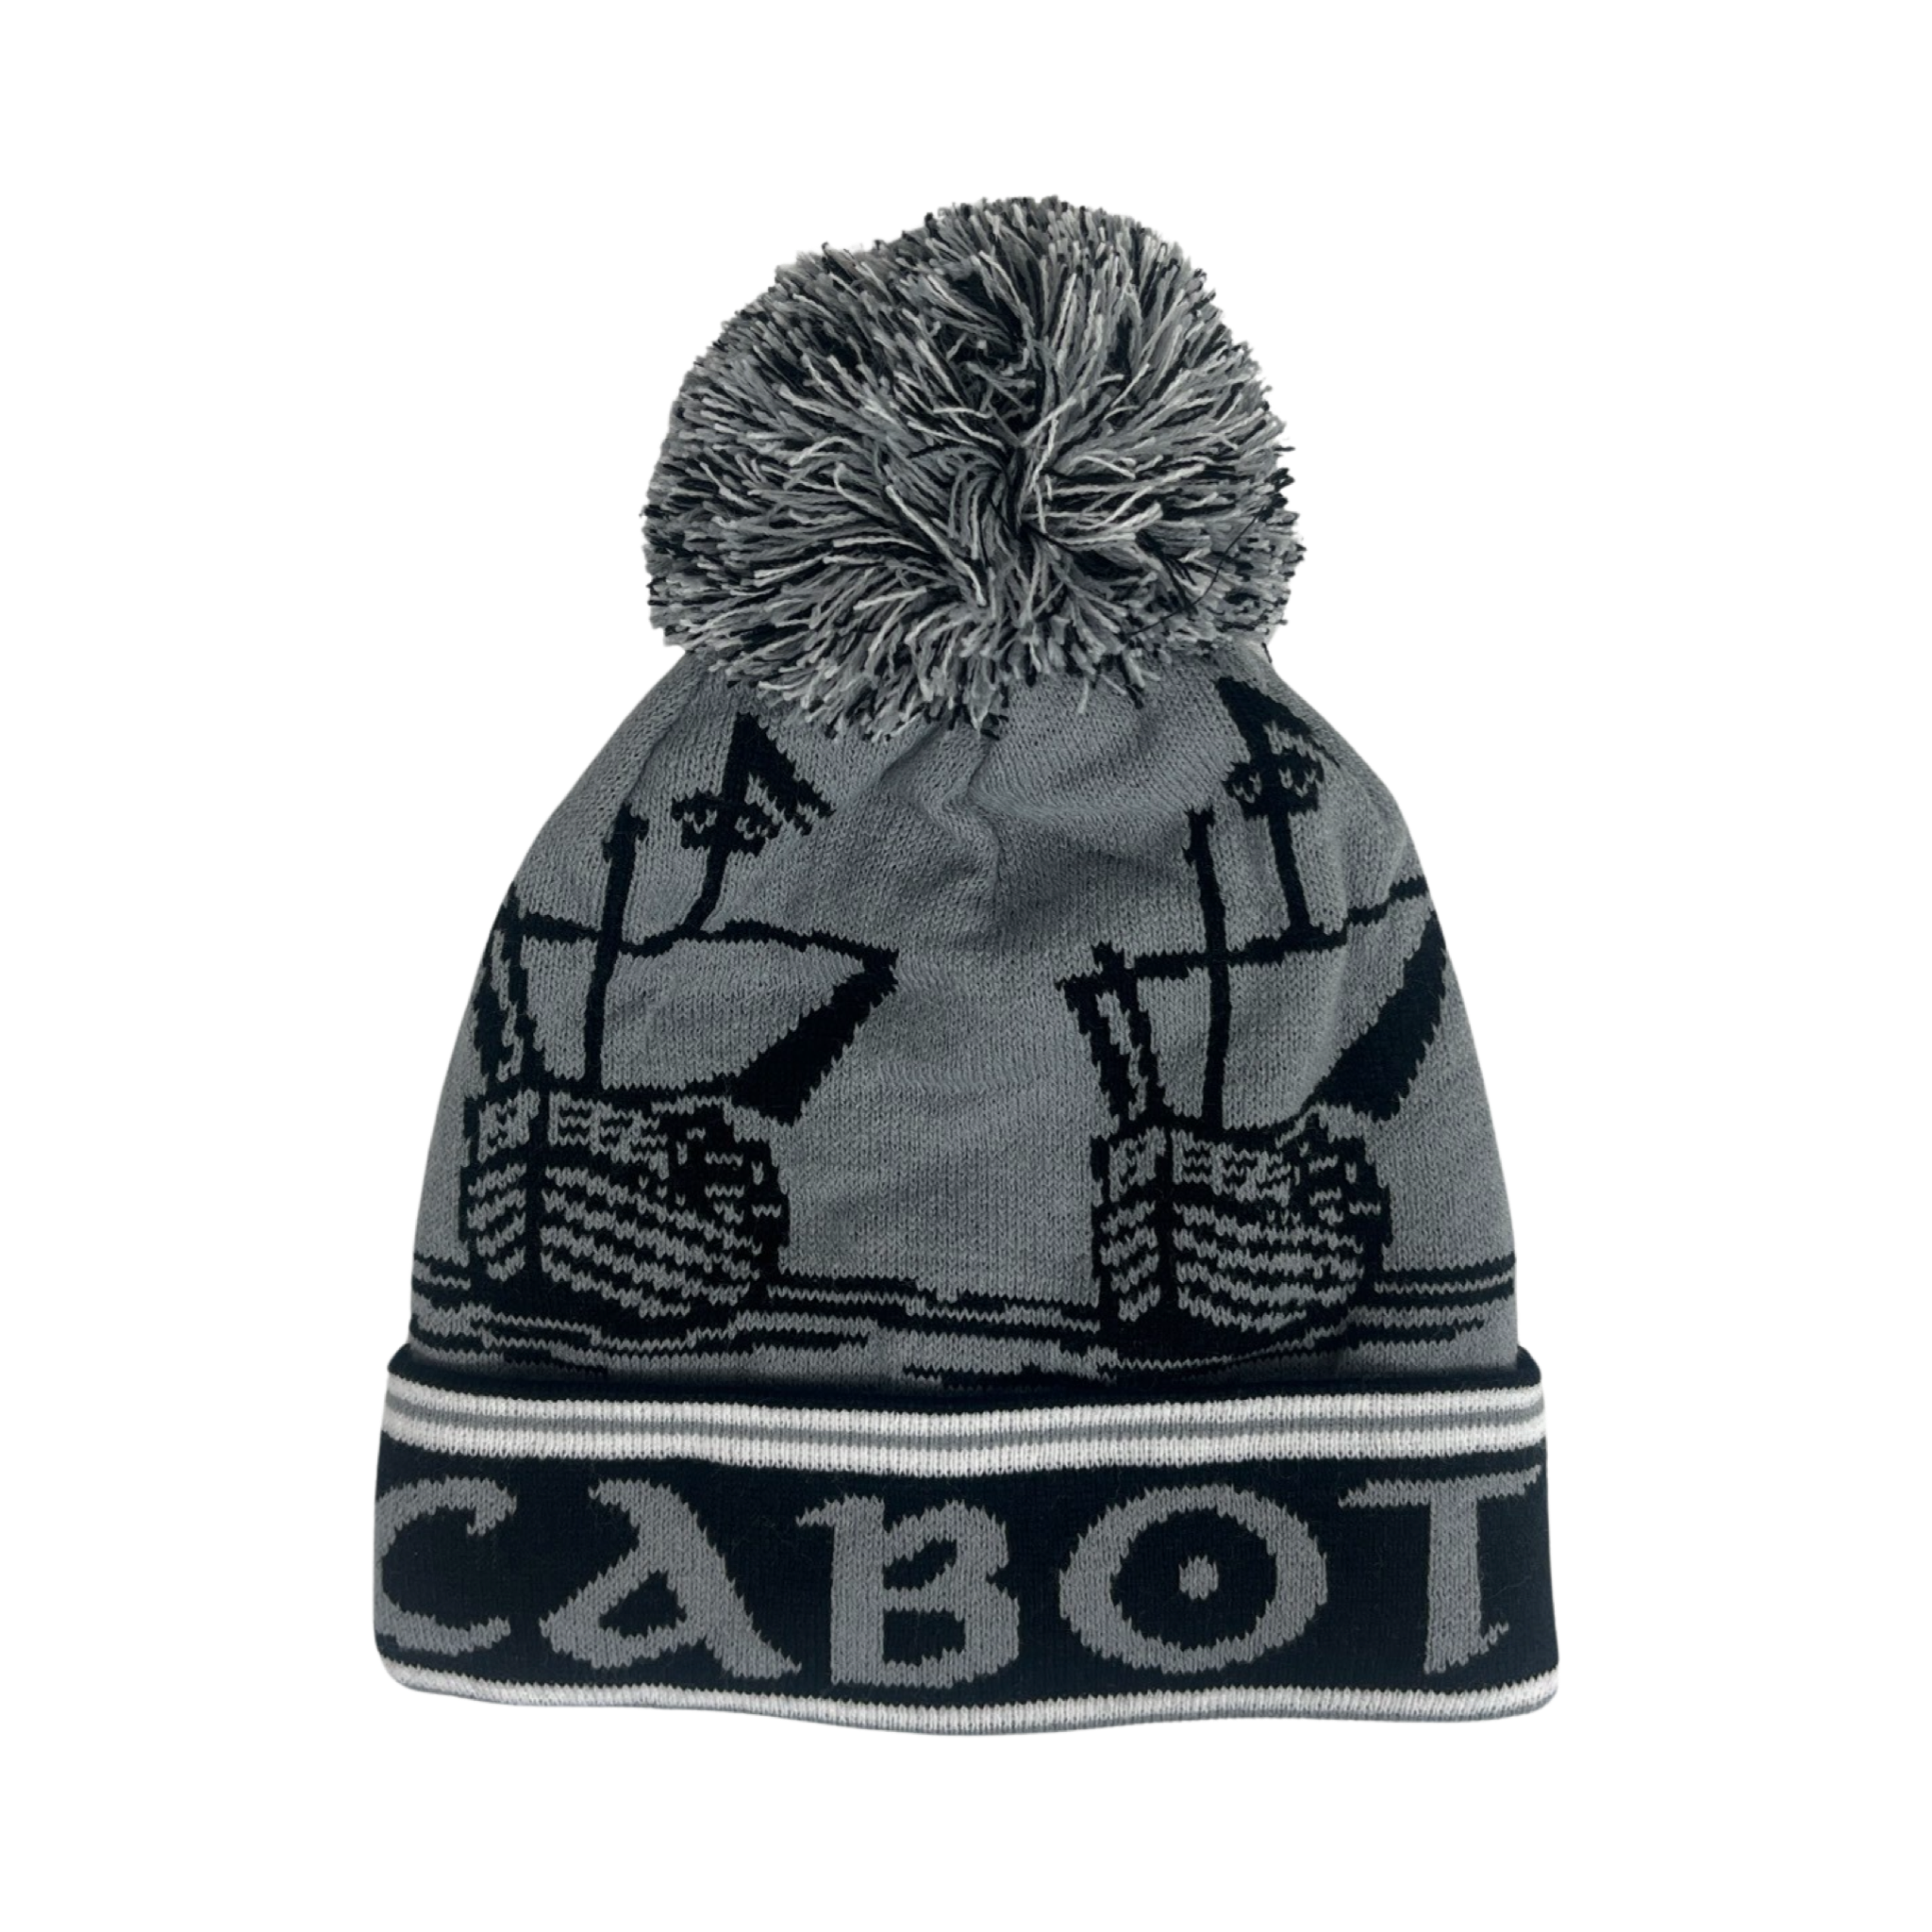 Cabot Links Knitted Toque